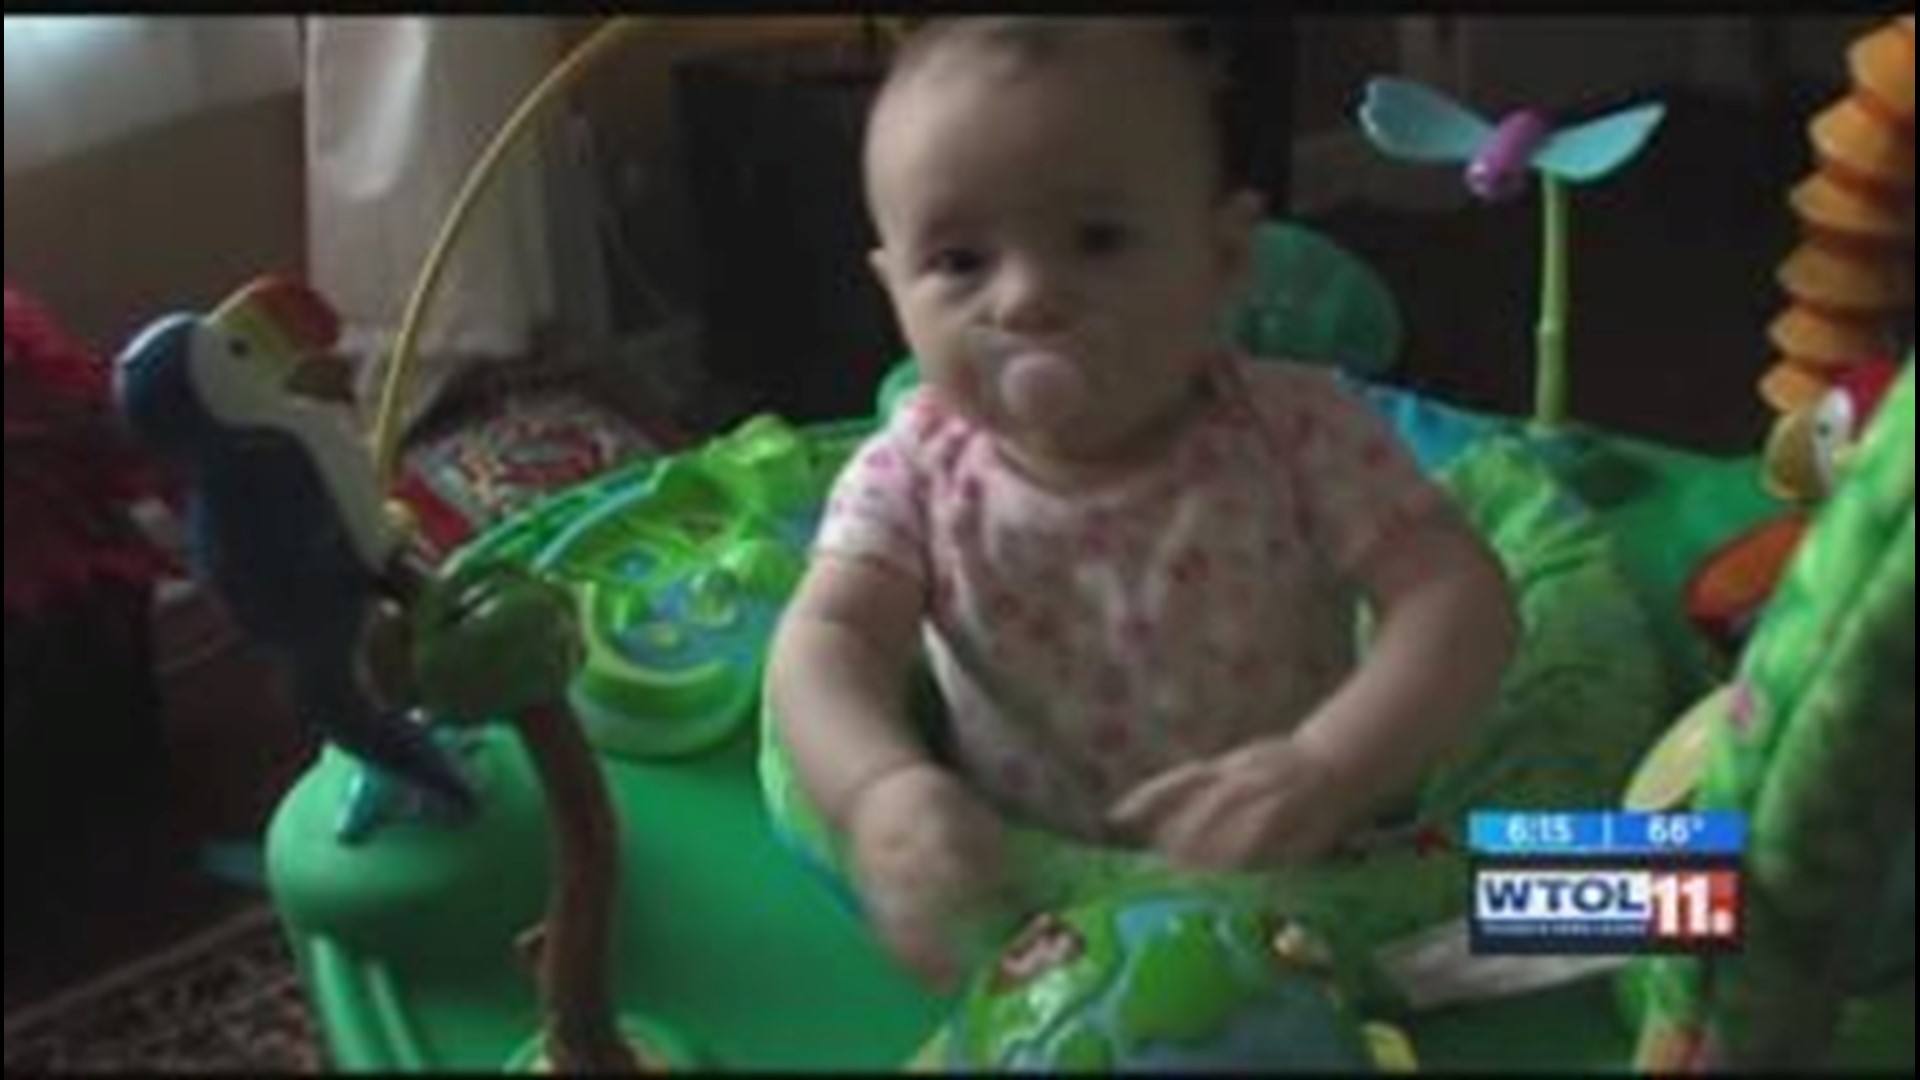 Family Focus: Doctors warn of injuries, deaths from using baby walkers